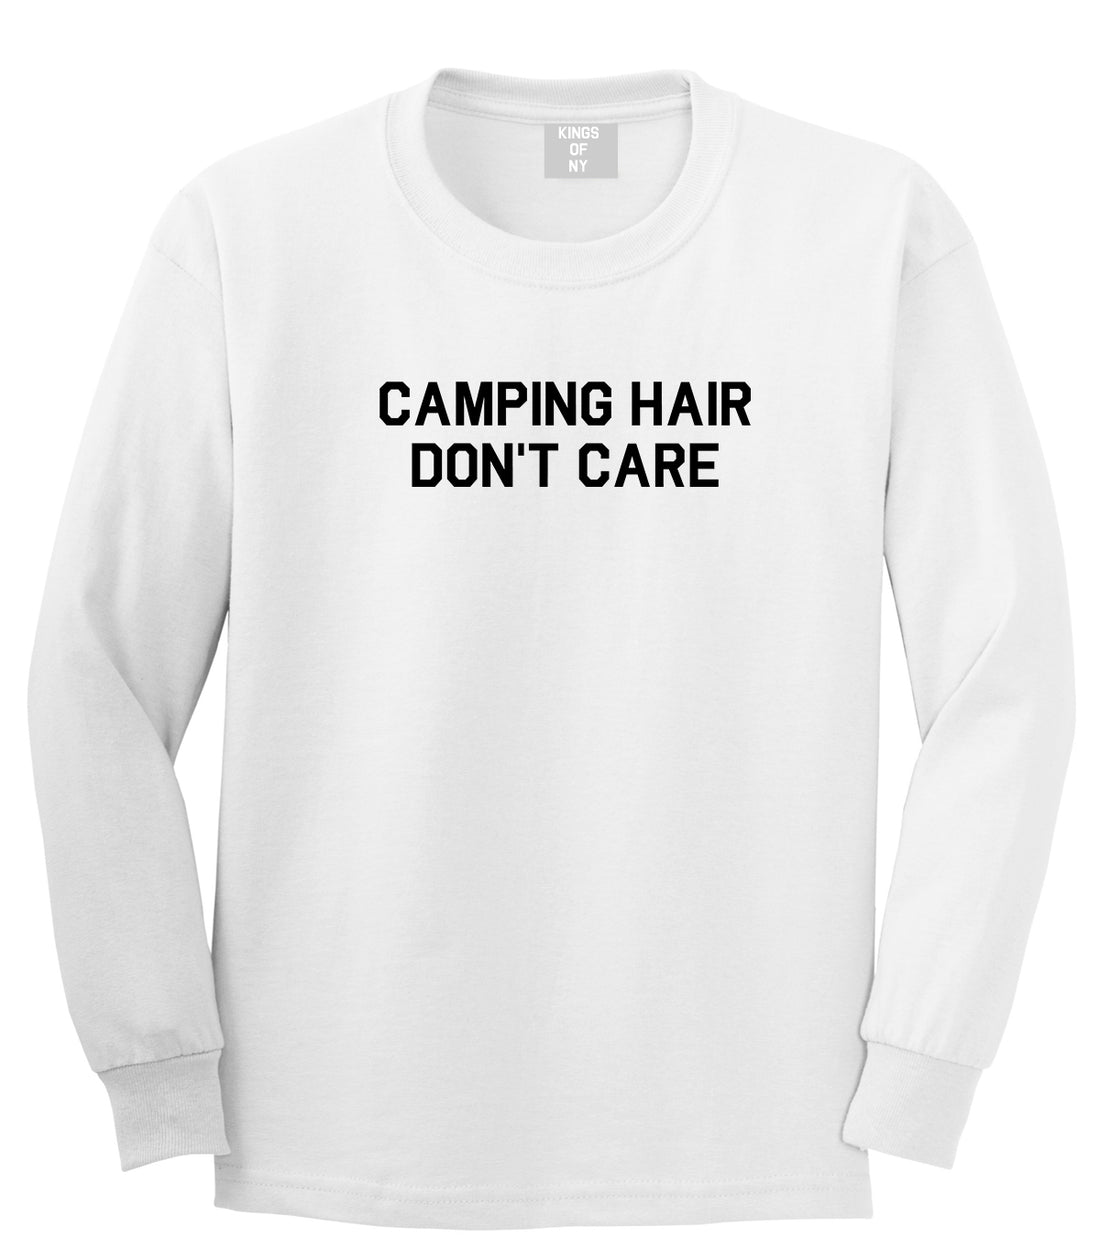 Camping Hair Dont Care White Long Sleeve T-Shirt by Kings Of NY